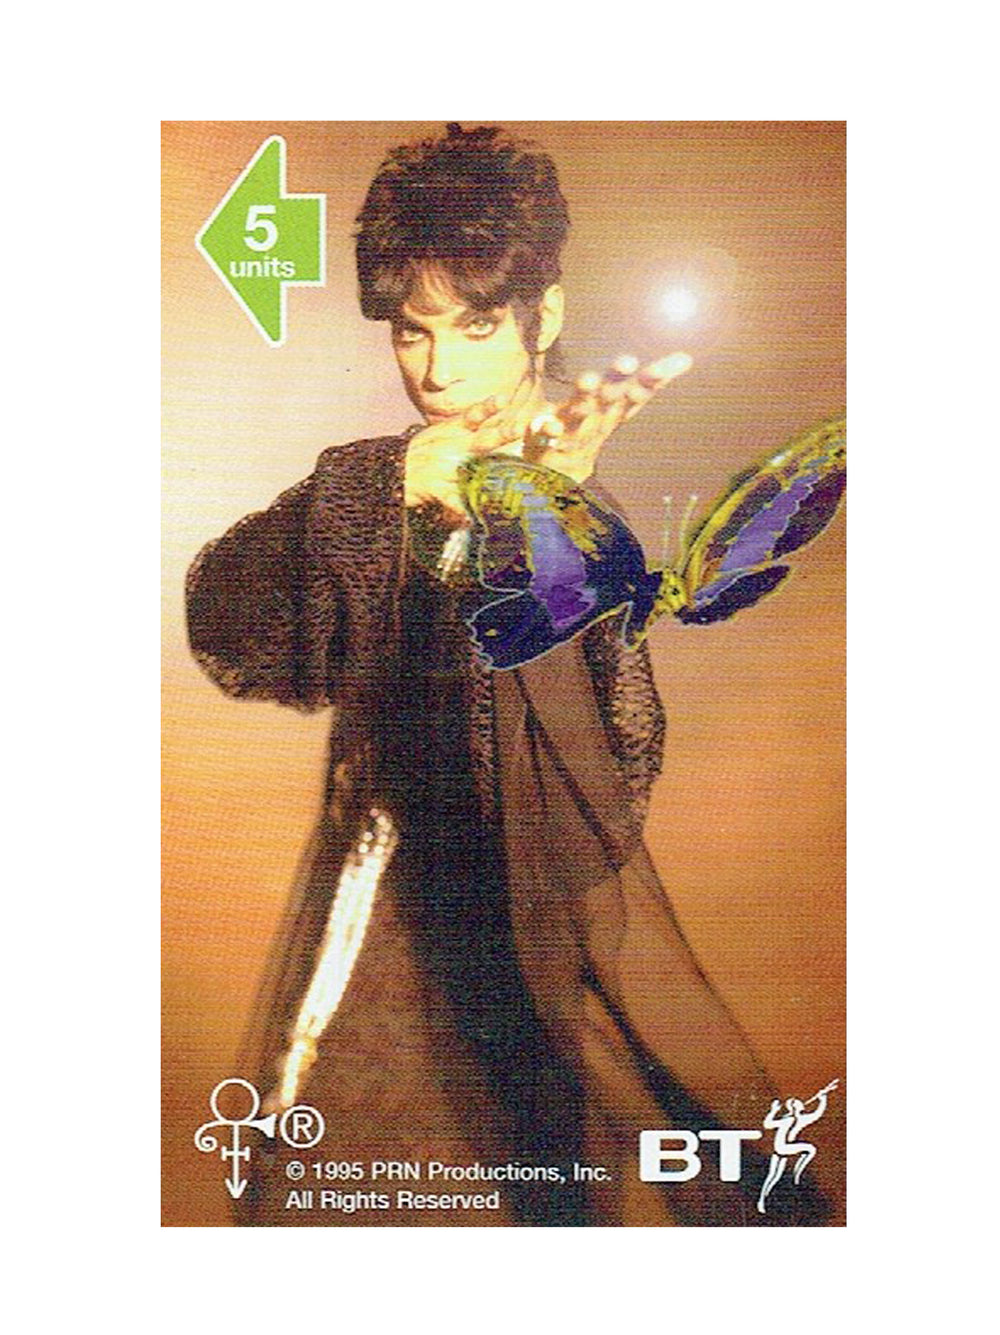 Prince – O(+> BT Phone Card Official PRN Productions Preloved: 1995